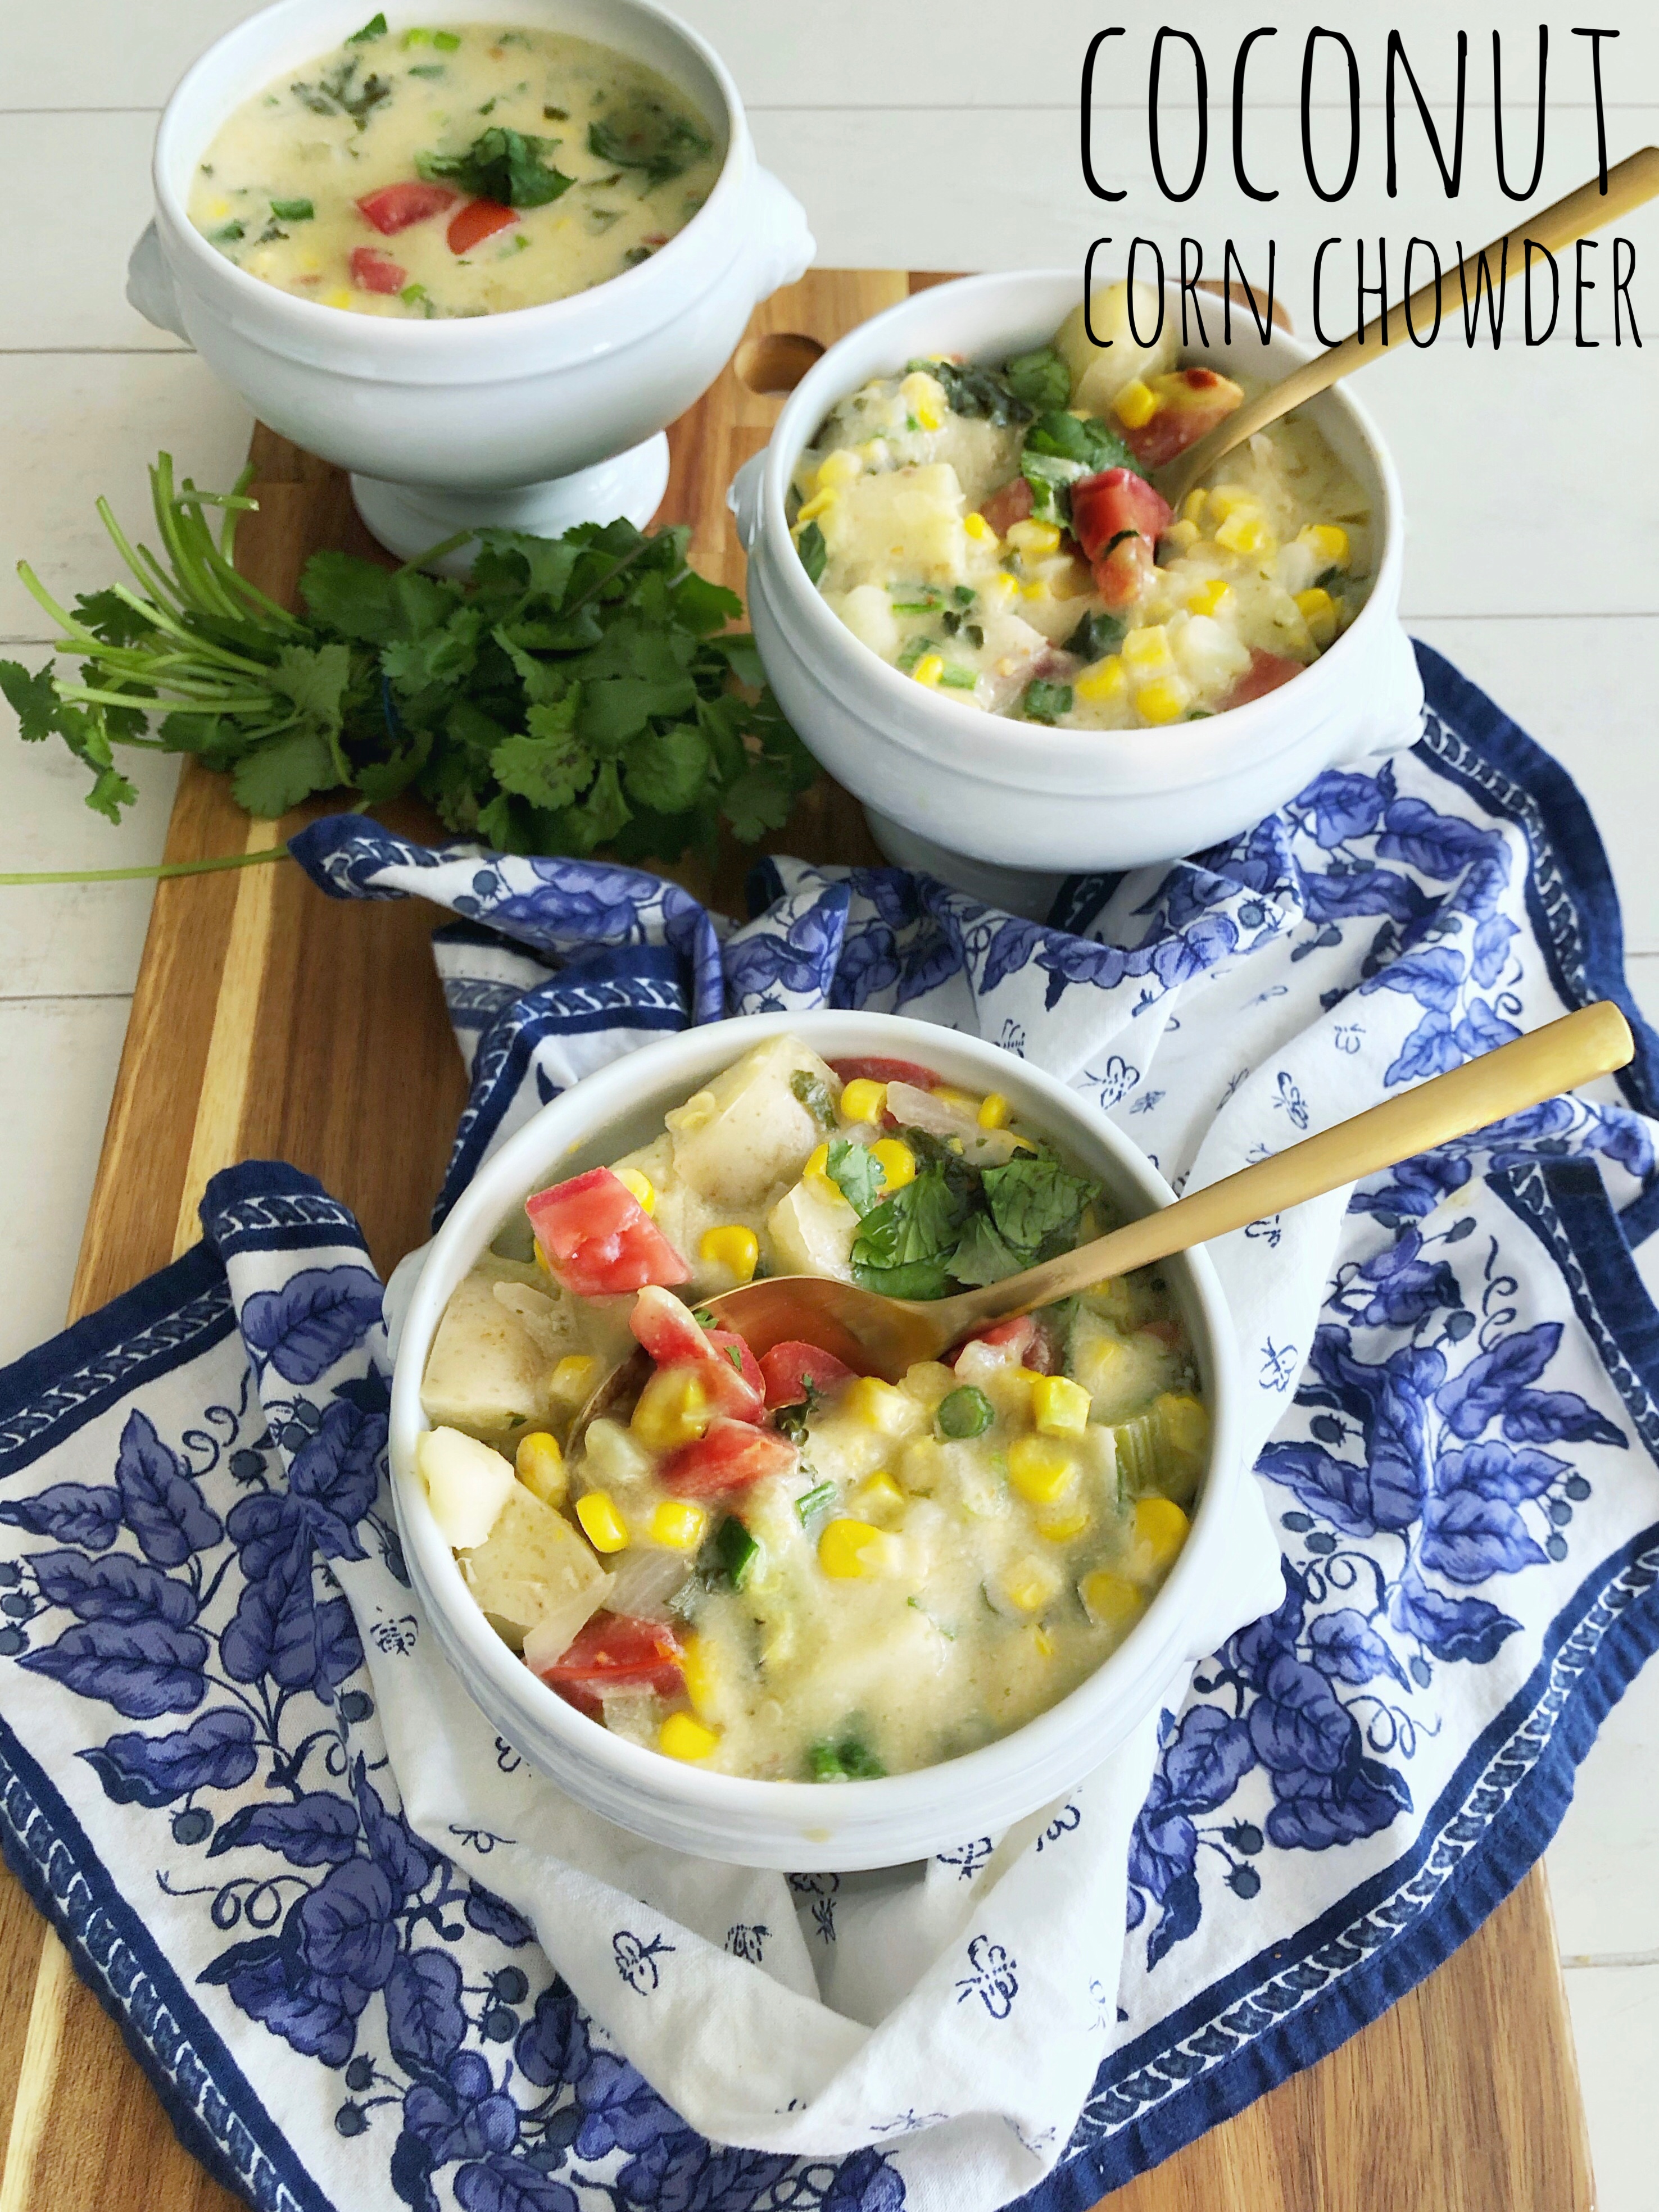 Try Our coconut corn chowder recipe